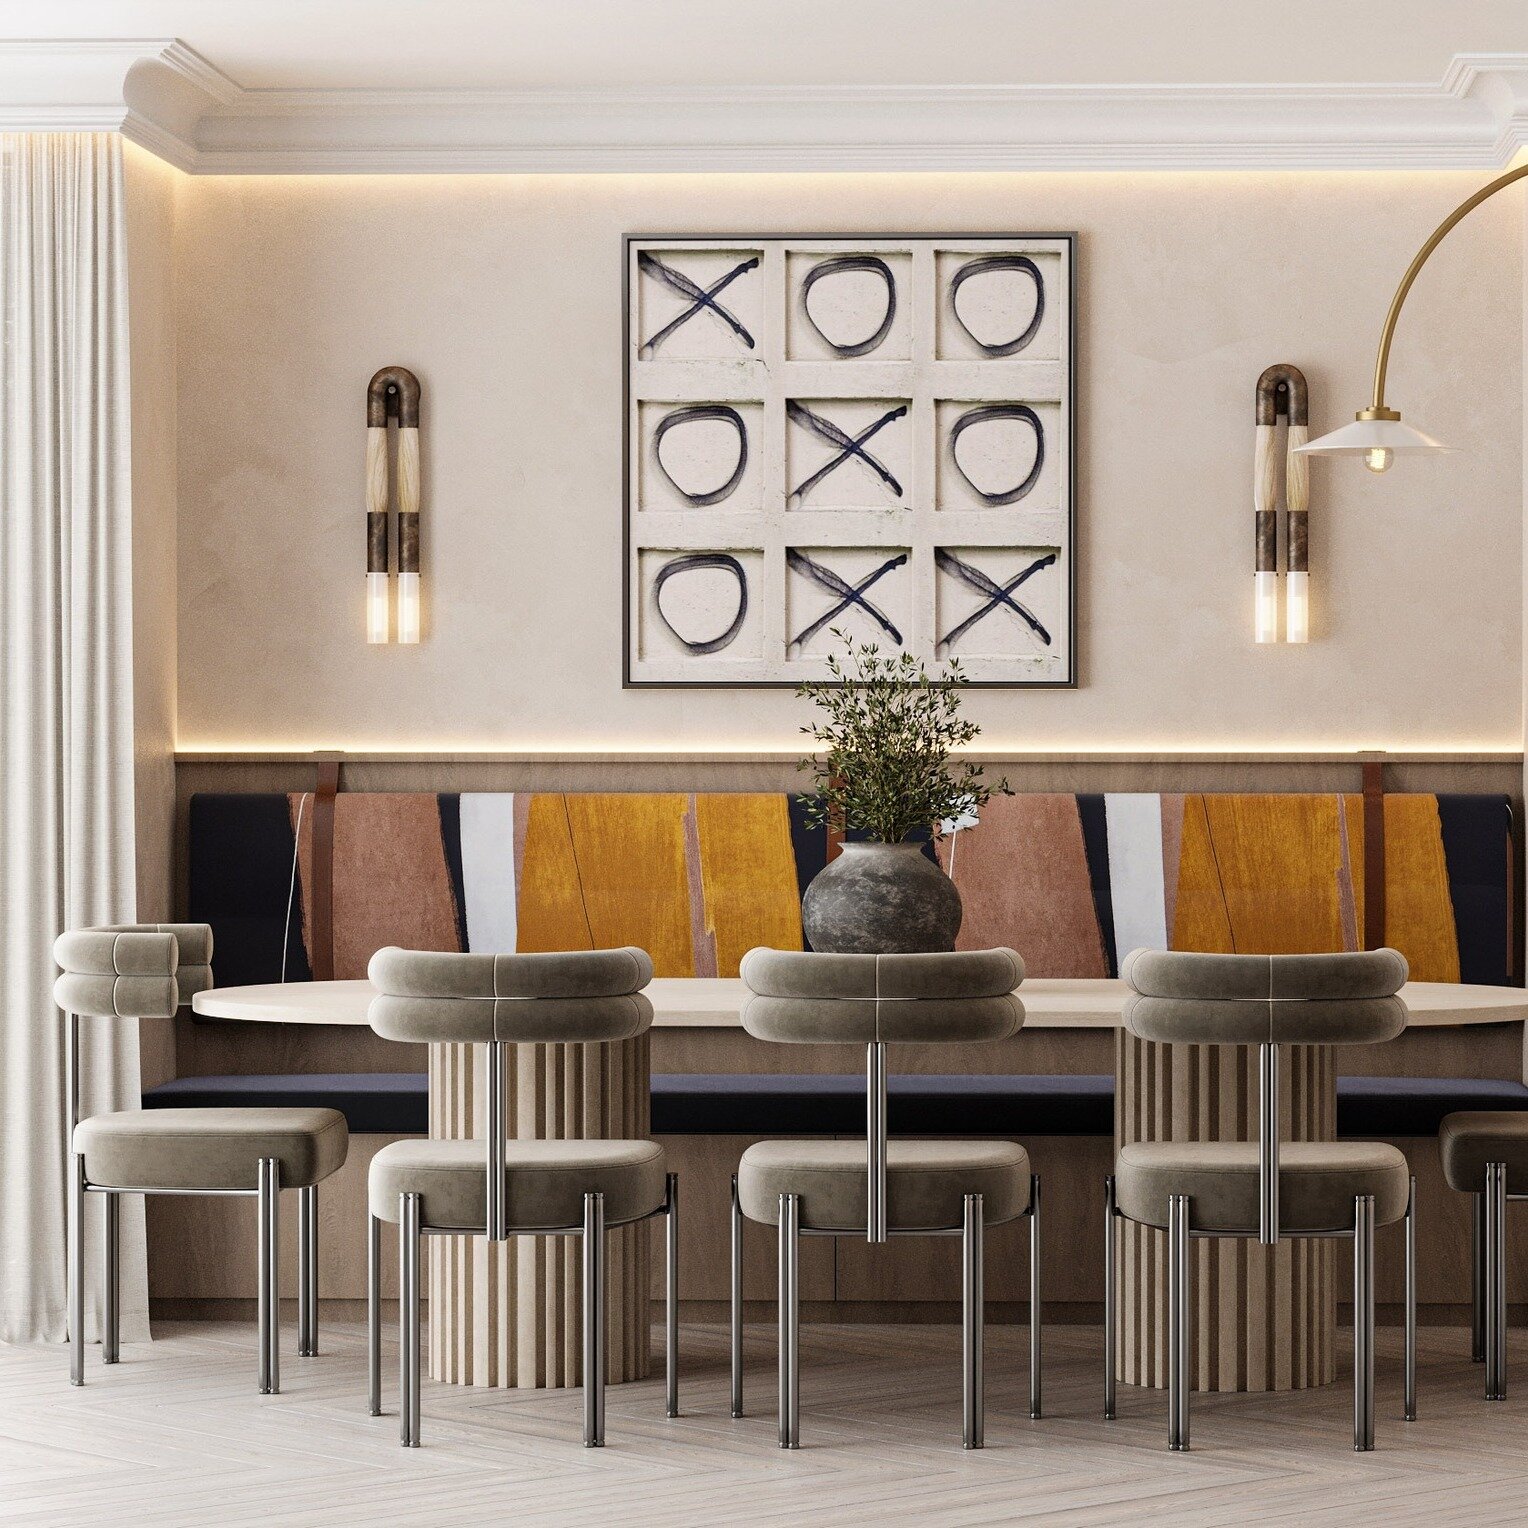 Starting the year by sharing this relaxed dining space we designed in London, a mixture of informality and opulence #DesignedbyBurntwood 

#interiors #homelondon #interiordesigner #interiordesignerlondon #luxuryhomes #interiors123 #diningspace #seati